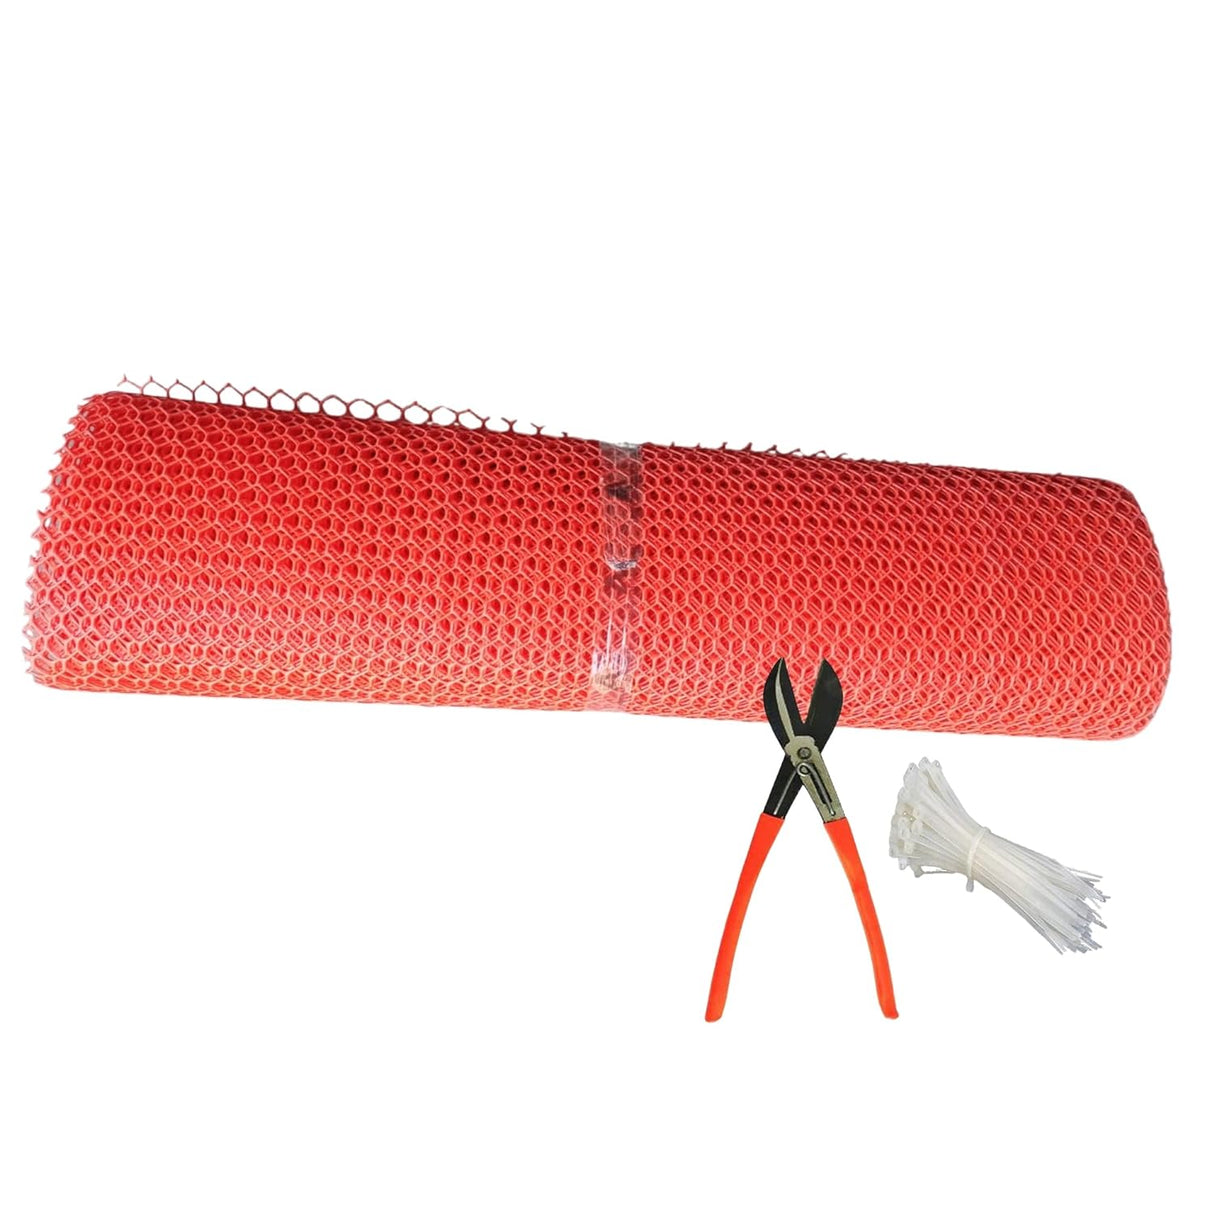 Singhal Tree Guard Net, Garden Fencing Net Virgin Plastic Red Color with 1 Cutter and 50 PVC Tags (4 x 20 Ft)